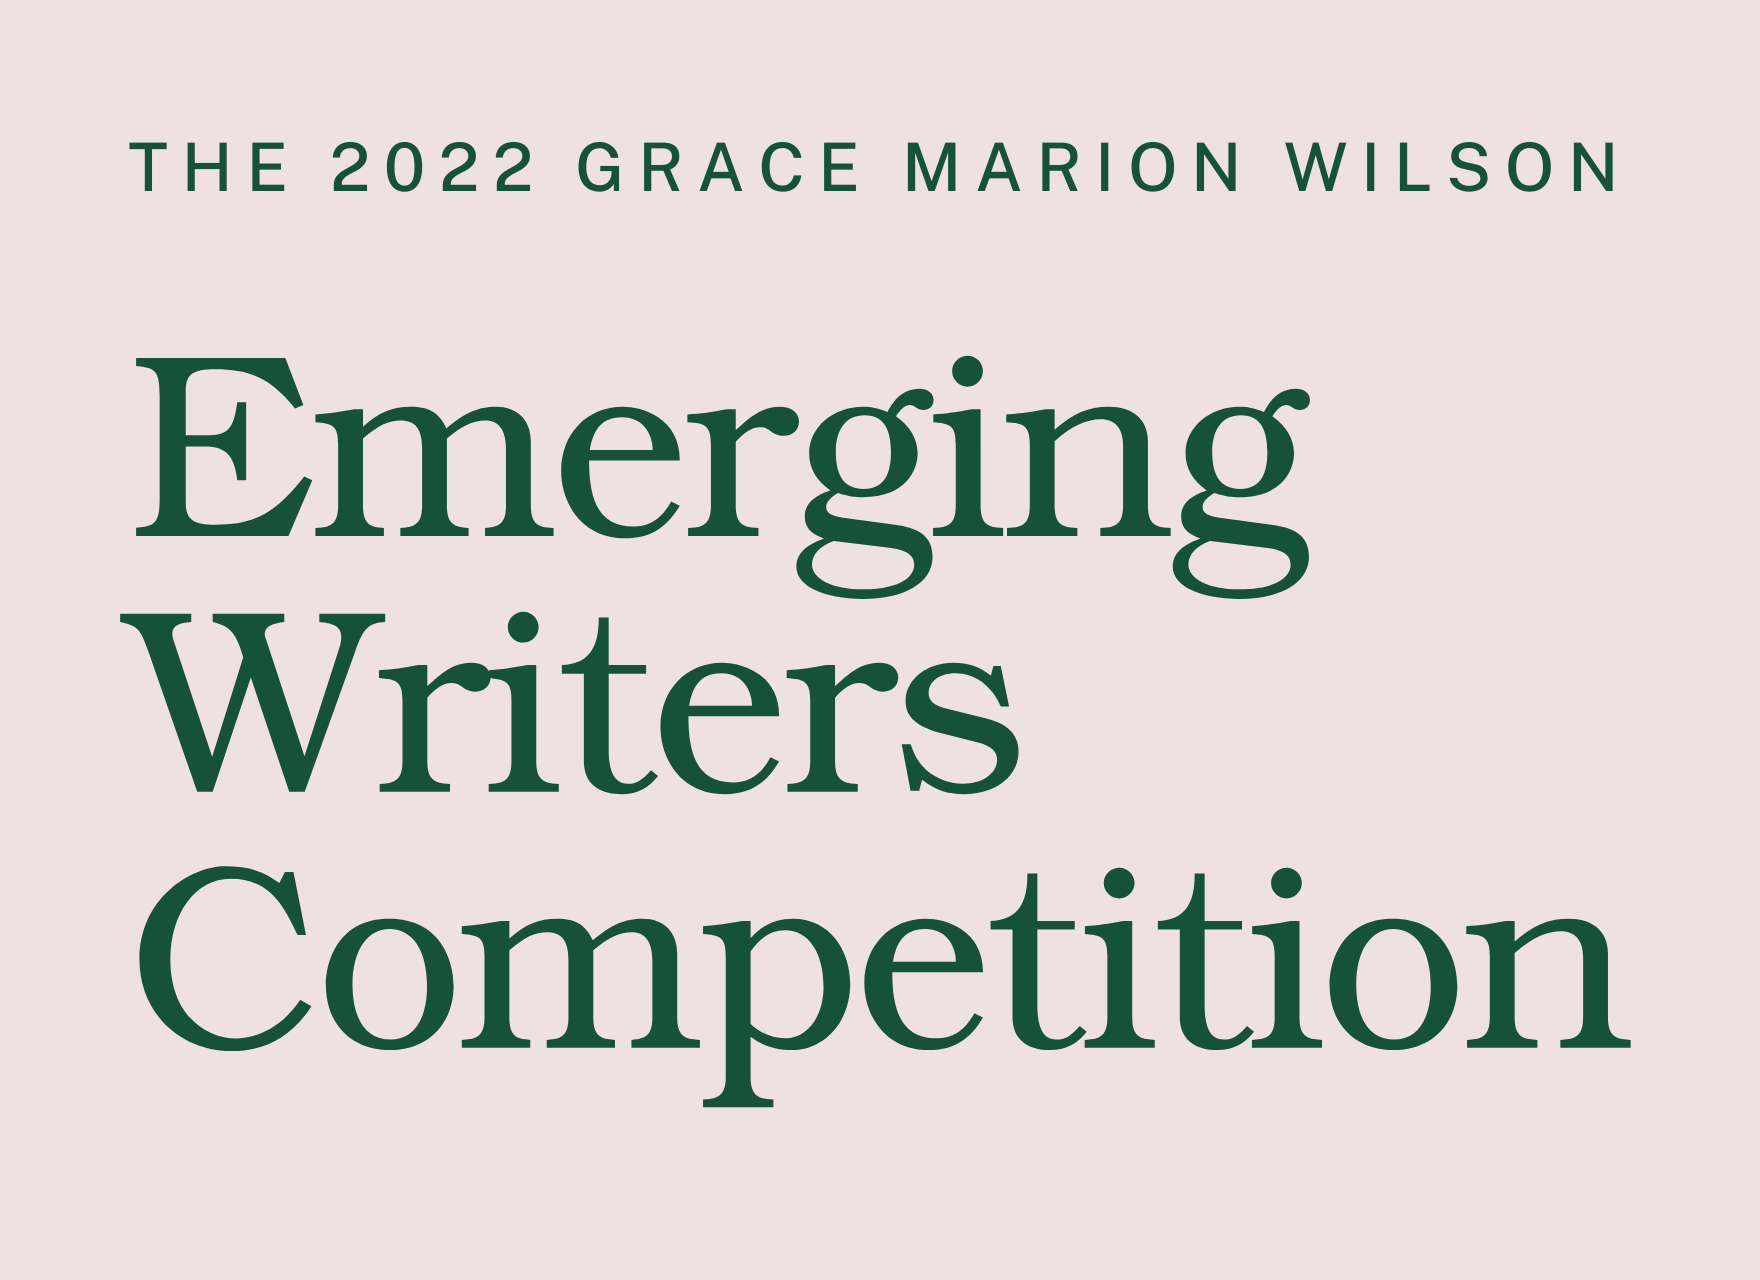 The 2022 Grace Marion Wilson Emerging Writers Competition